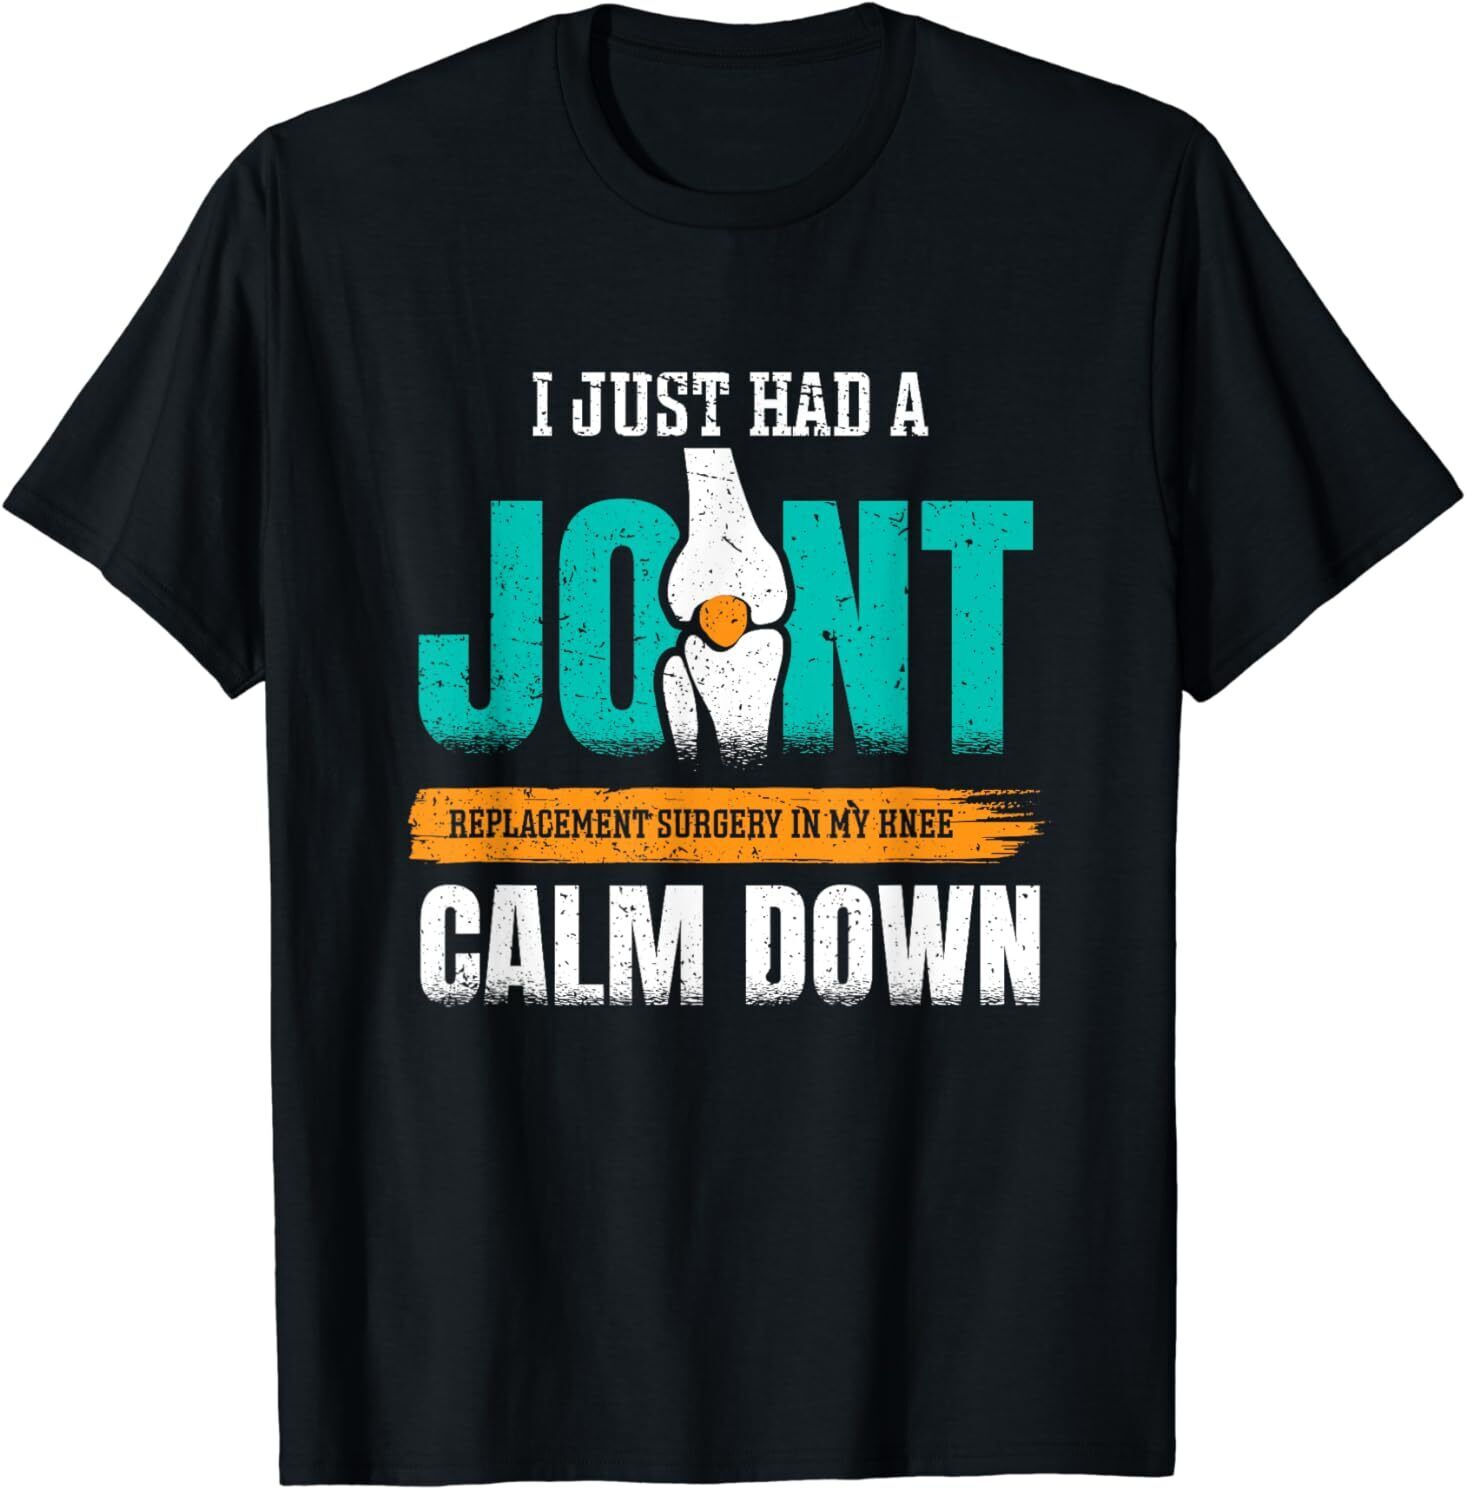 NEW LIMITED I just had Joint - Knee Replacement Design Best Gift T-Shirt S-3XL